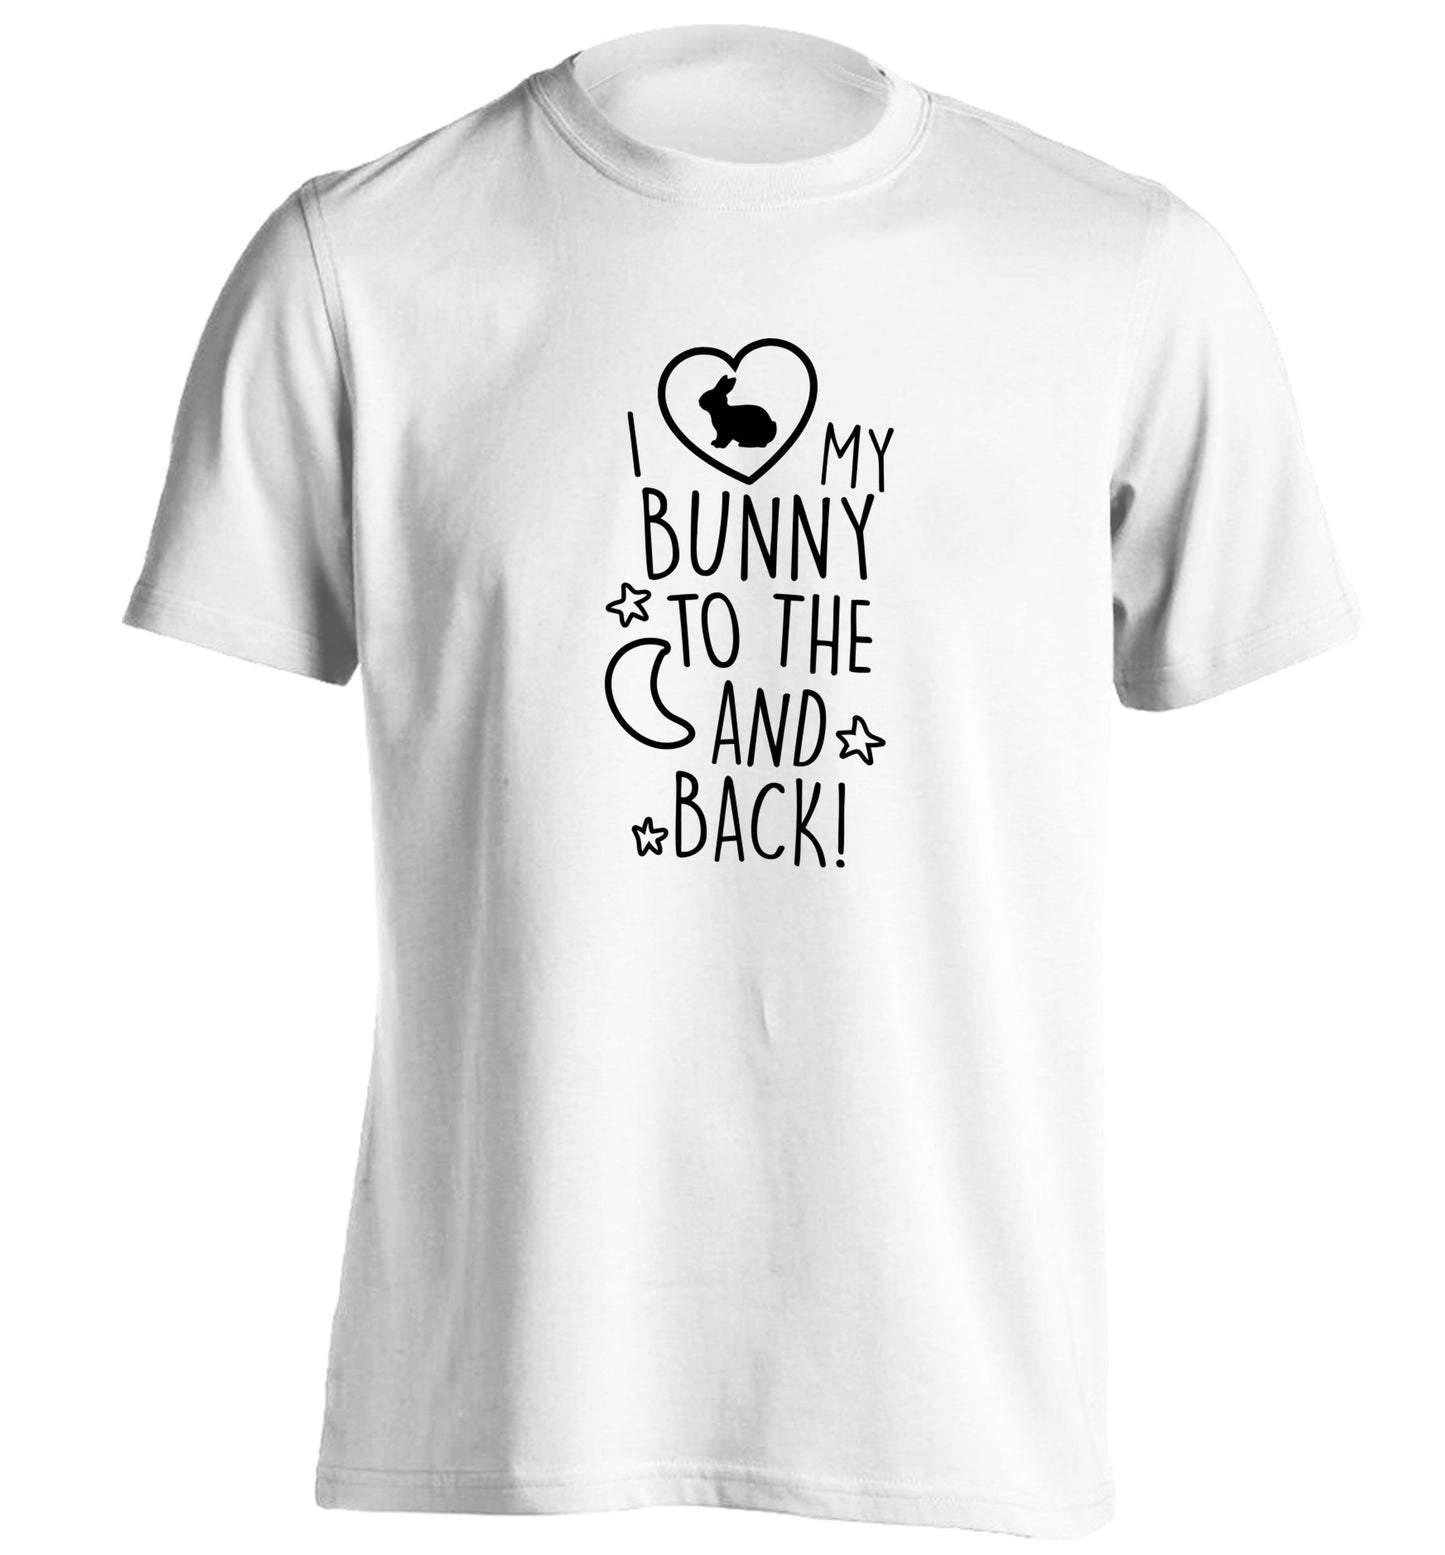 I love my bunny to the moon and back adults unisex white Tshirt 2XL